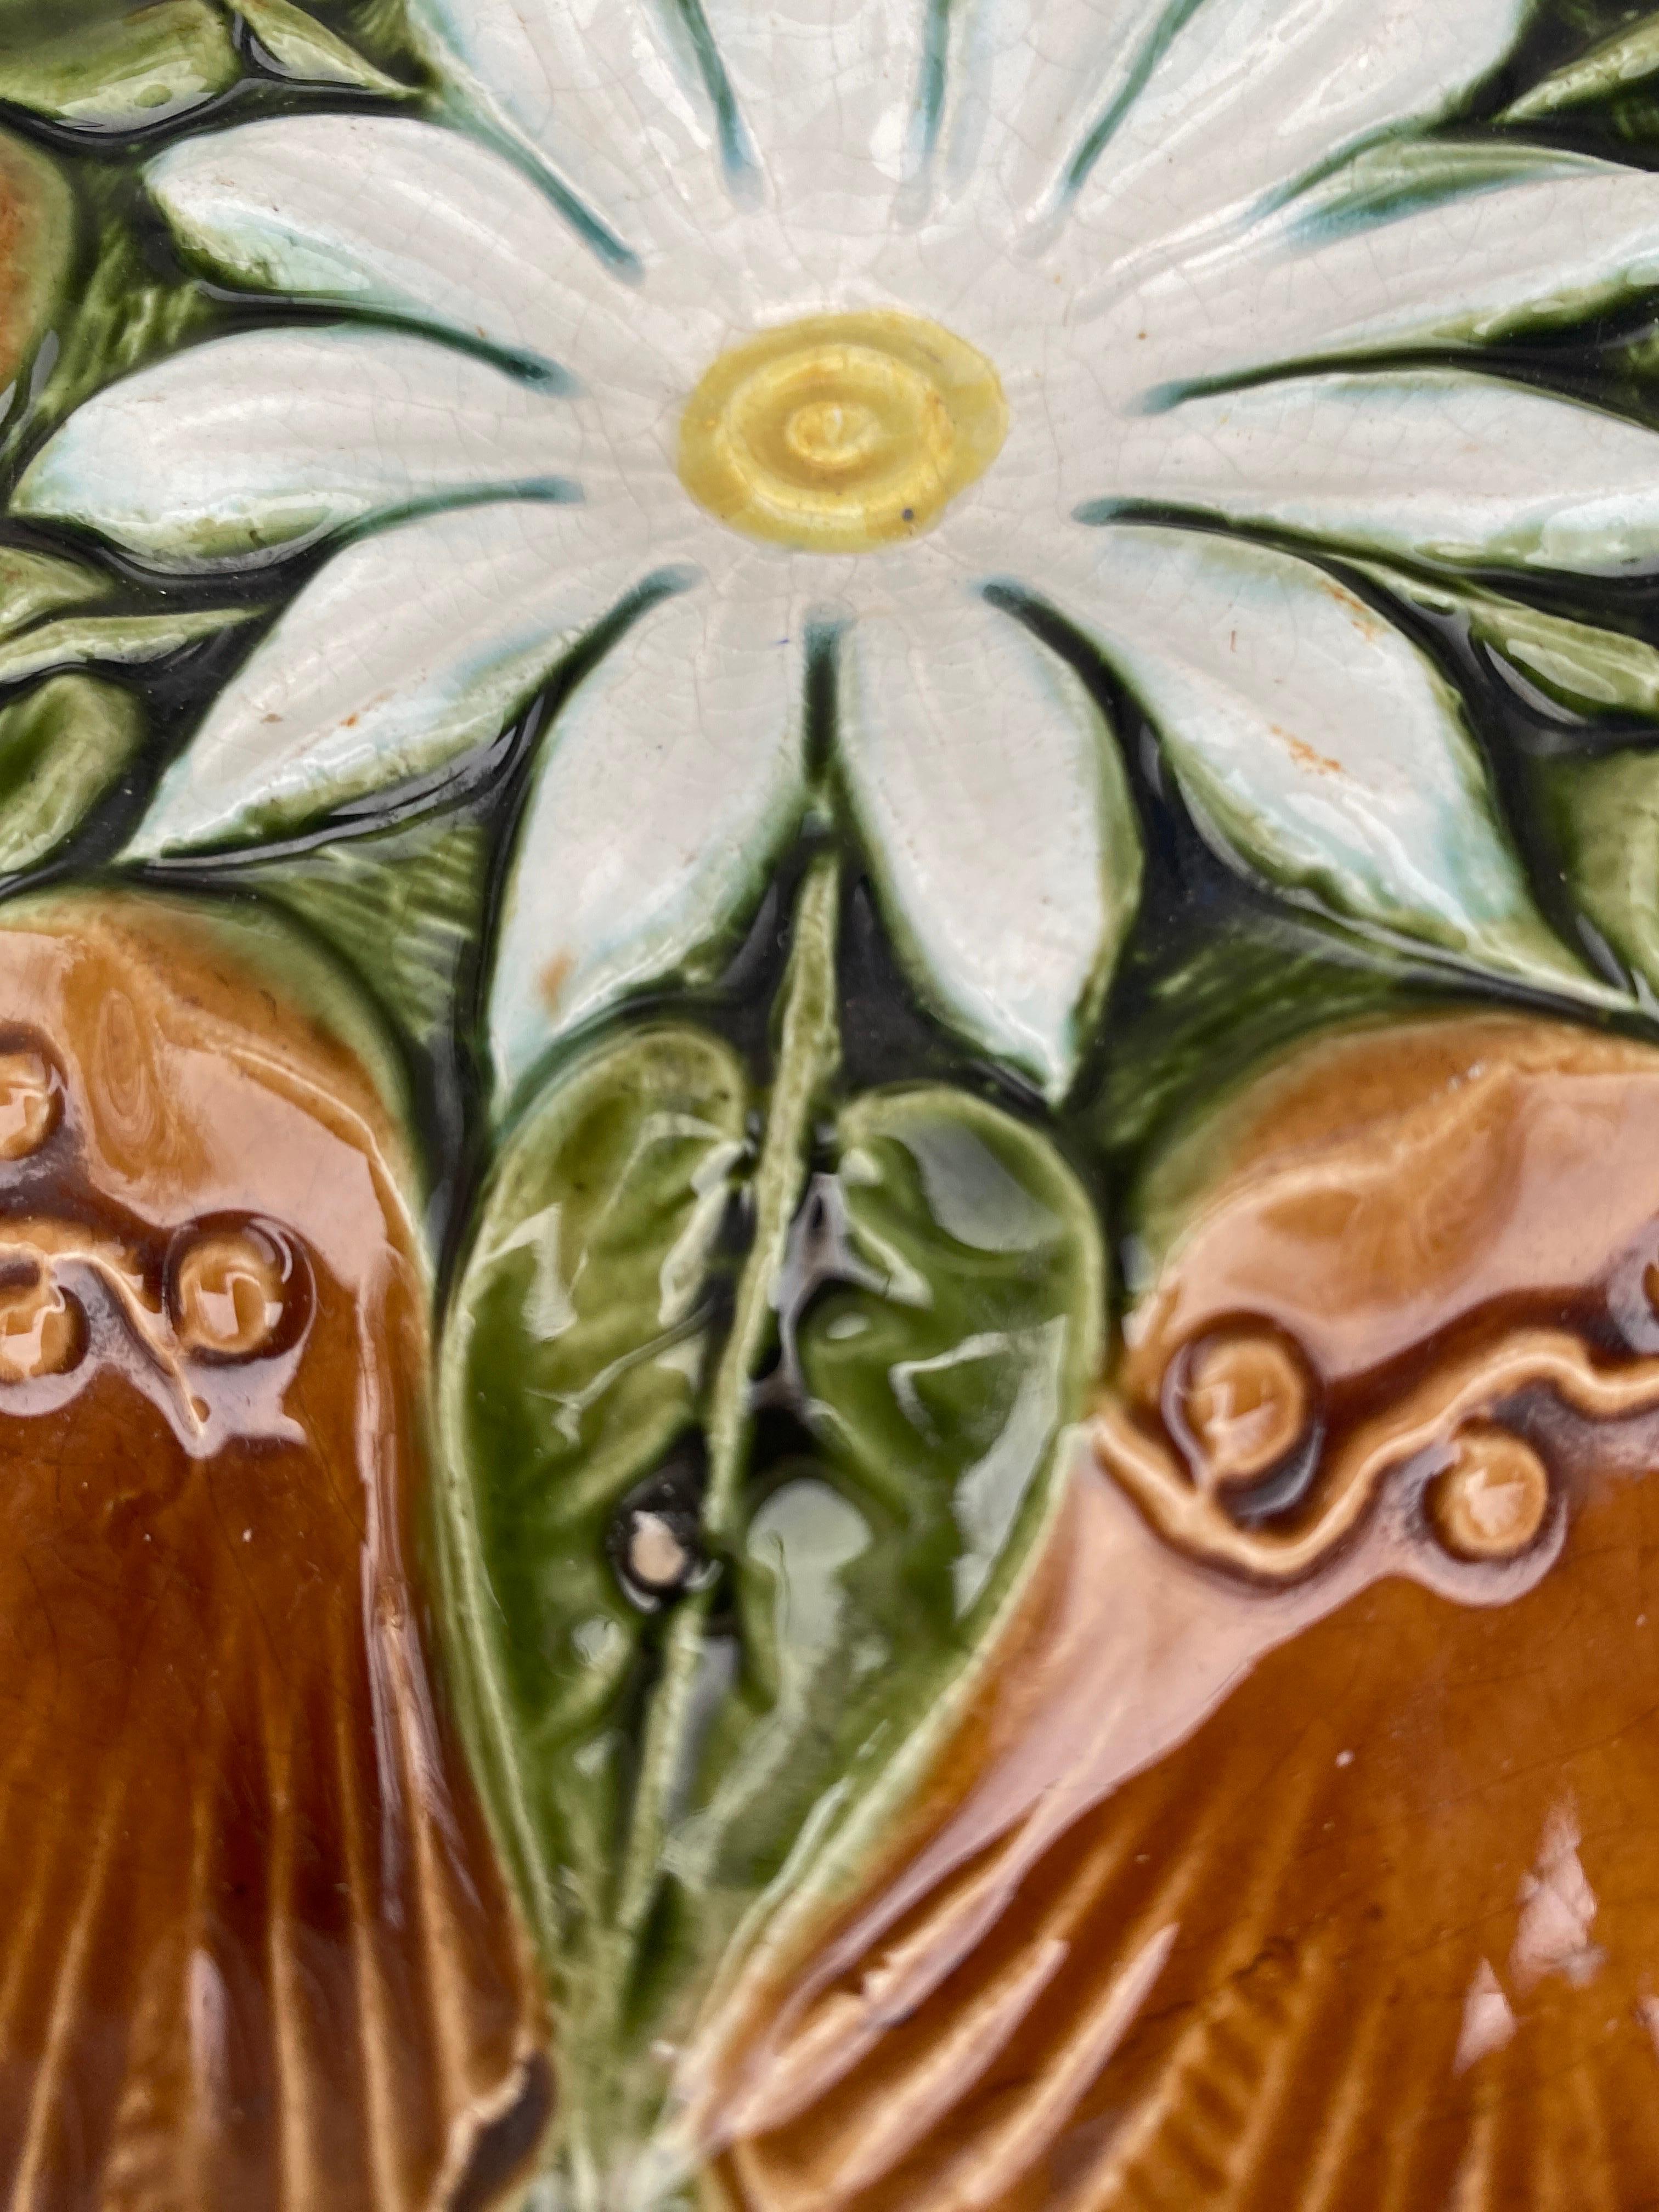 Very rare French Majolica oyster plate, circa 1890.
White flower on the center and leaves.